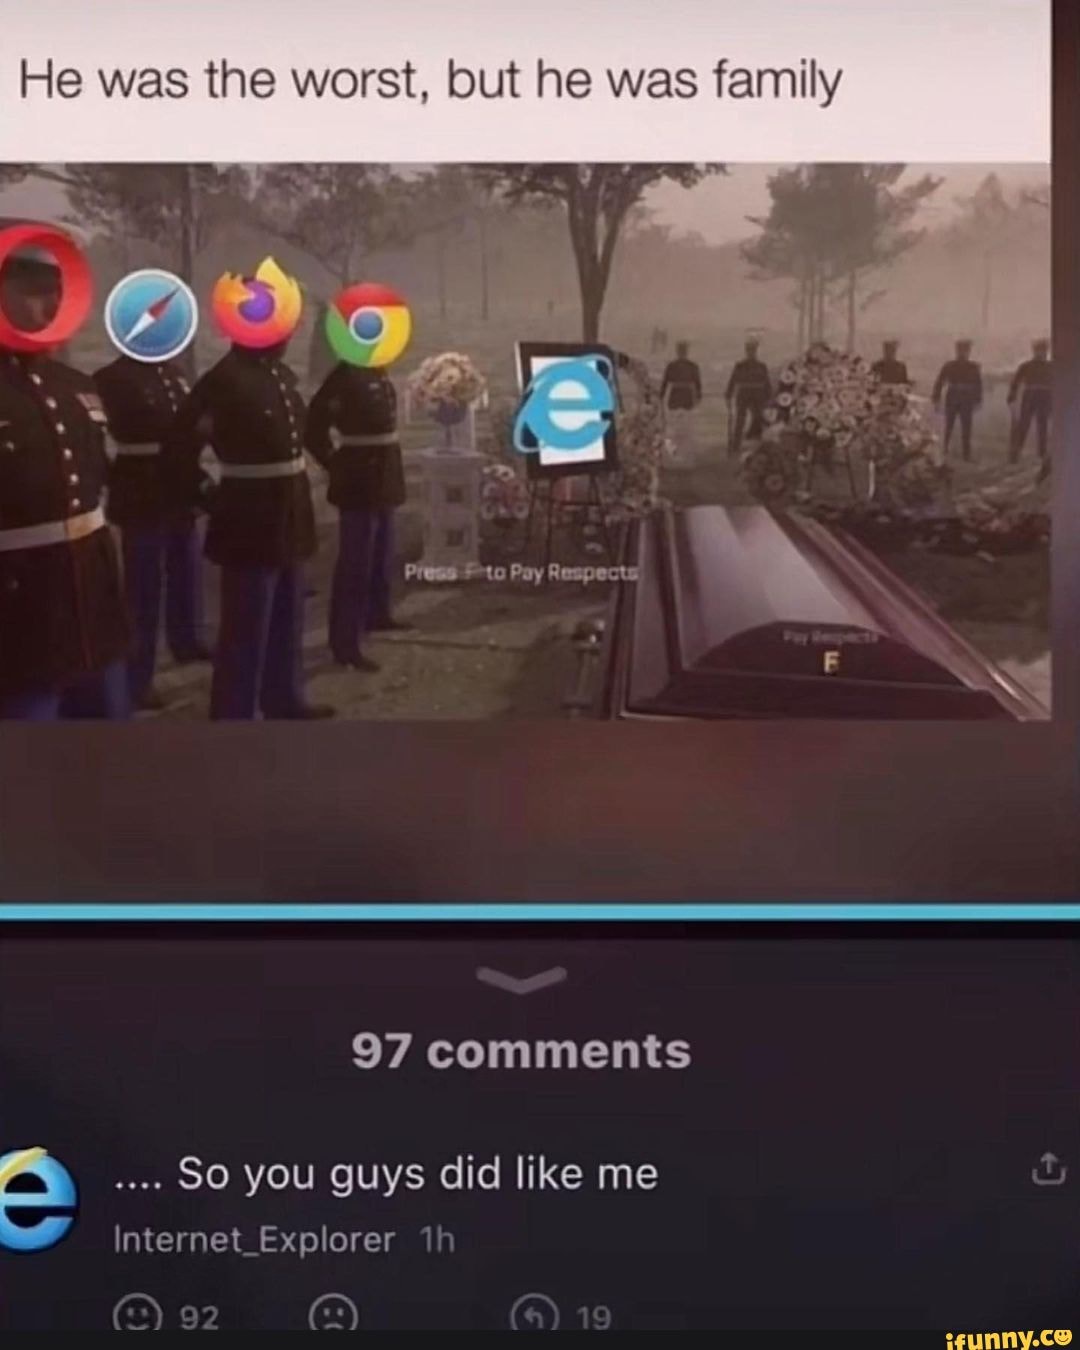 internet explorer, Press F to Pay Respects